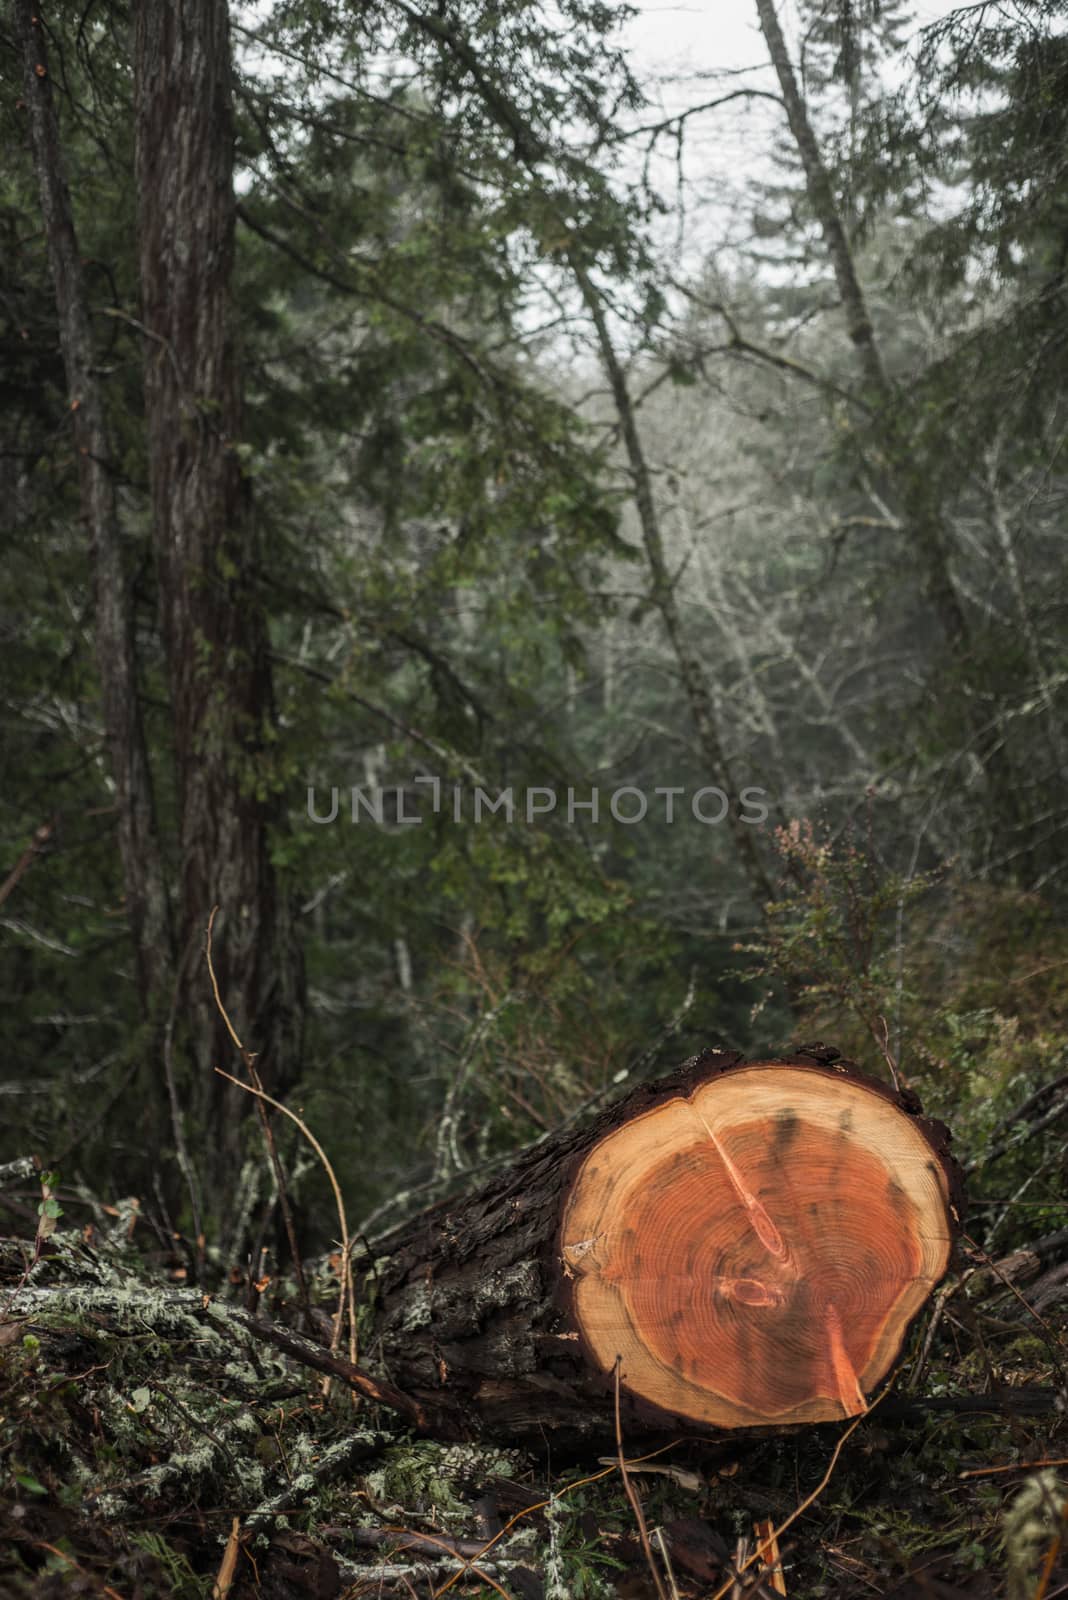 Deforestation of the ancient Redwoods in Humboldt County, Northern California by Pendleton